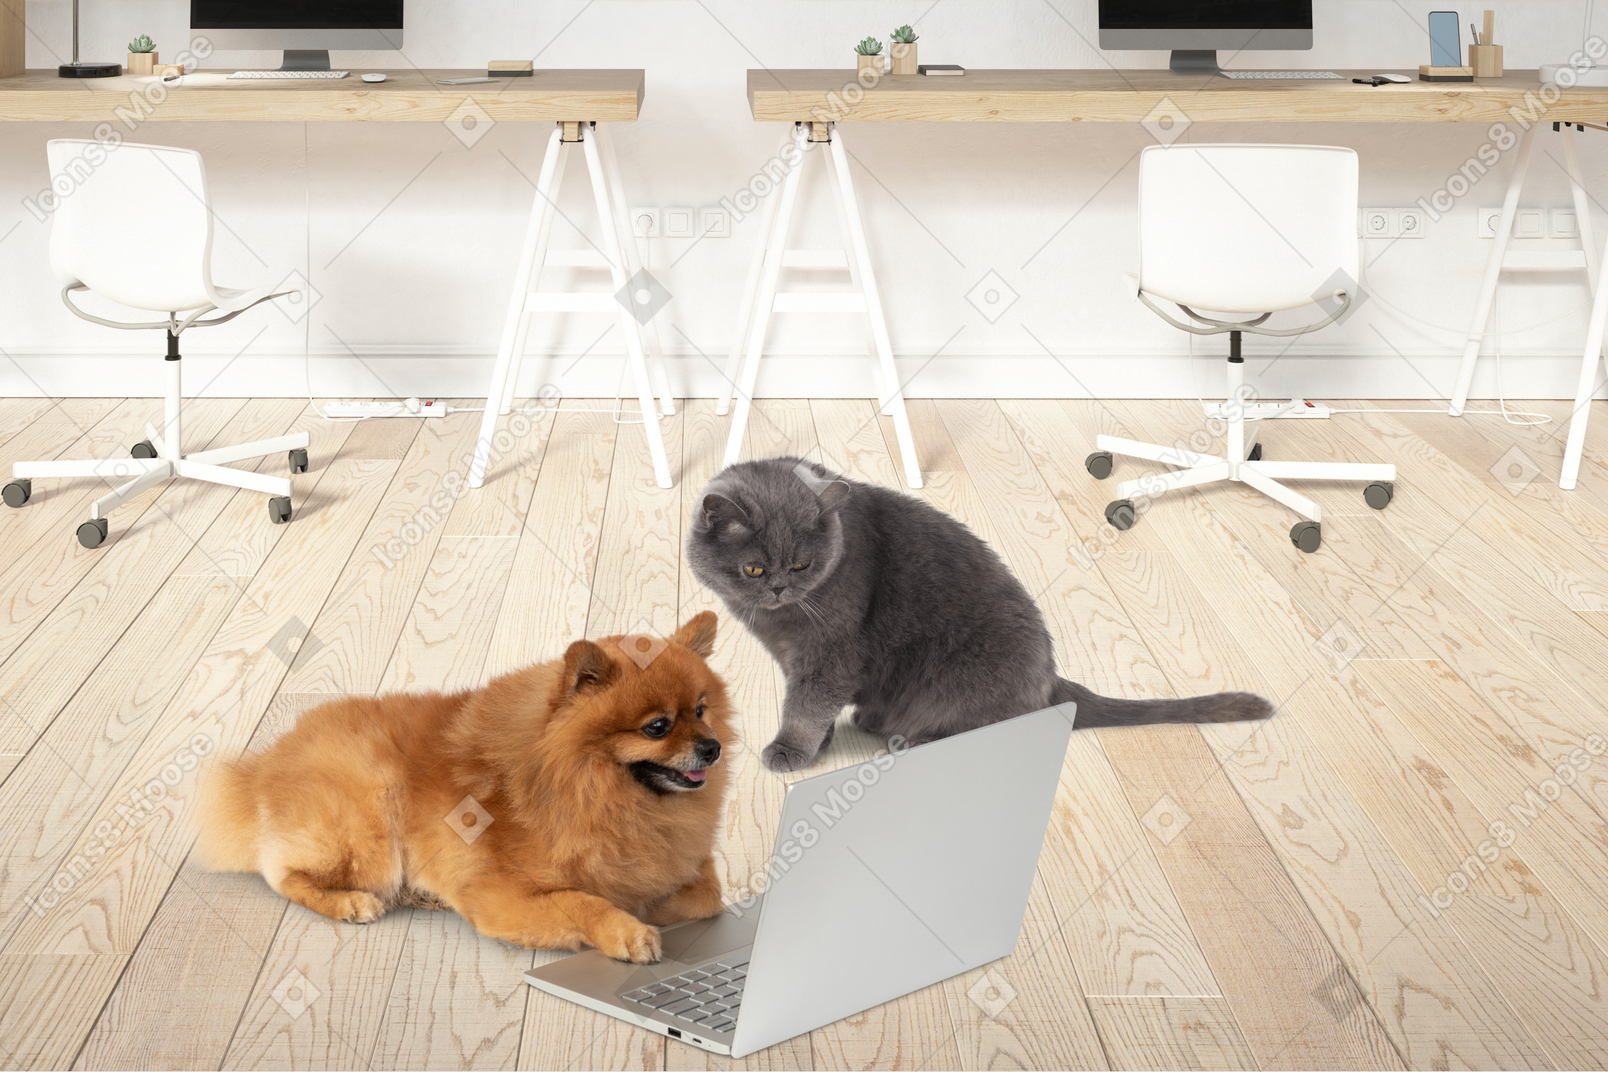 A cat and a dog looking at a laptop